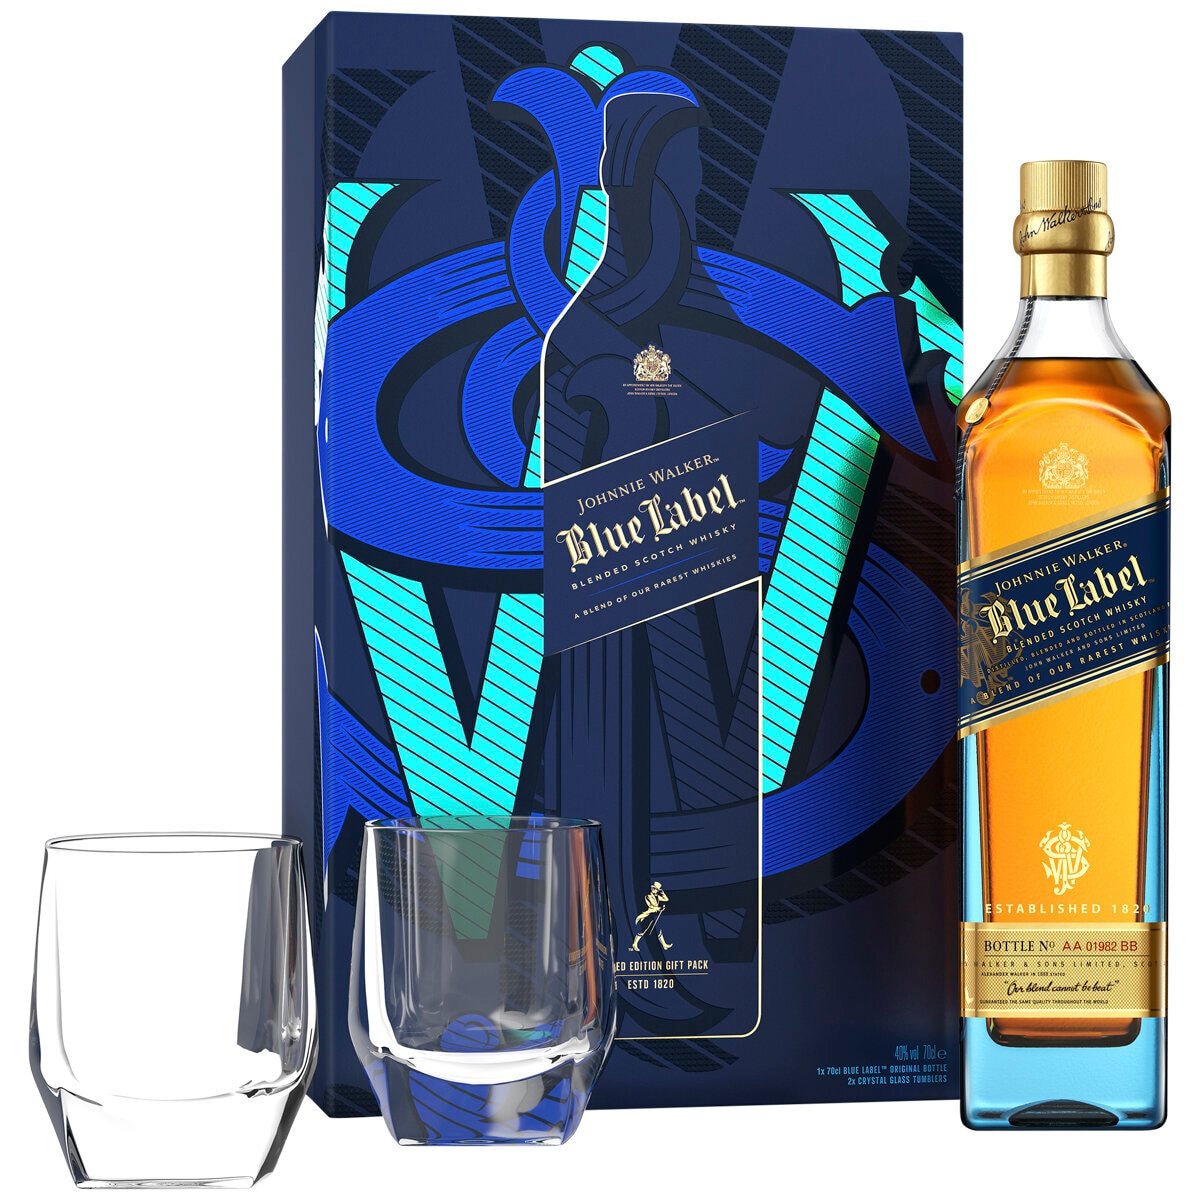 Johnnie Walker Blue Label Blended Scotch Whisky 700ml with 2 Crystal Glasses